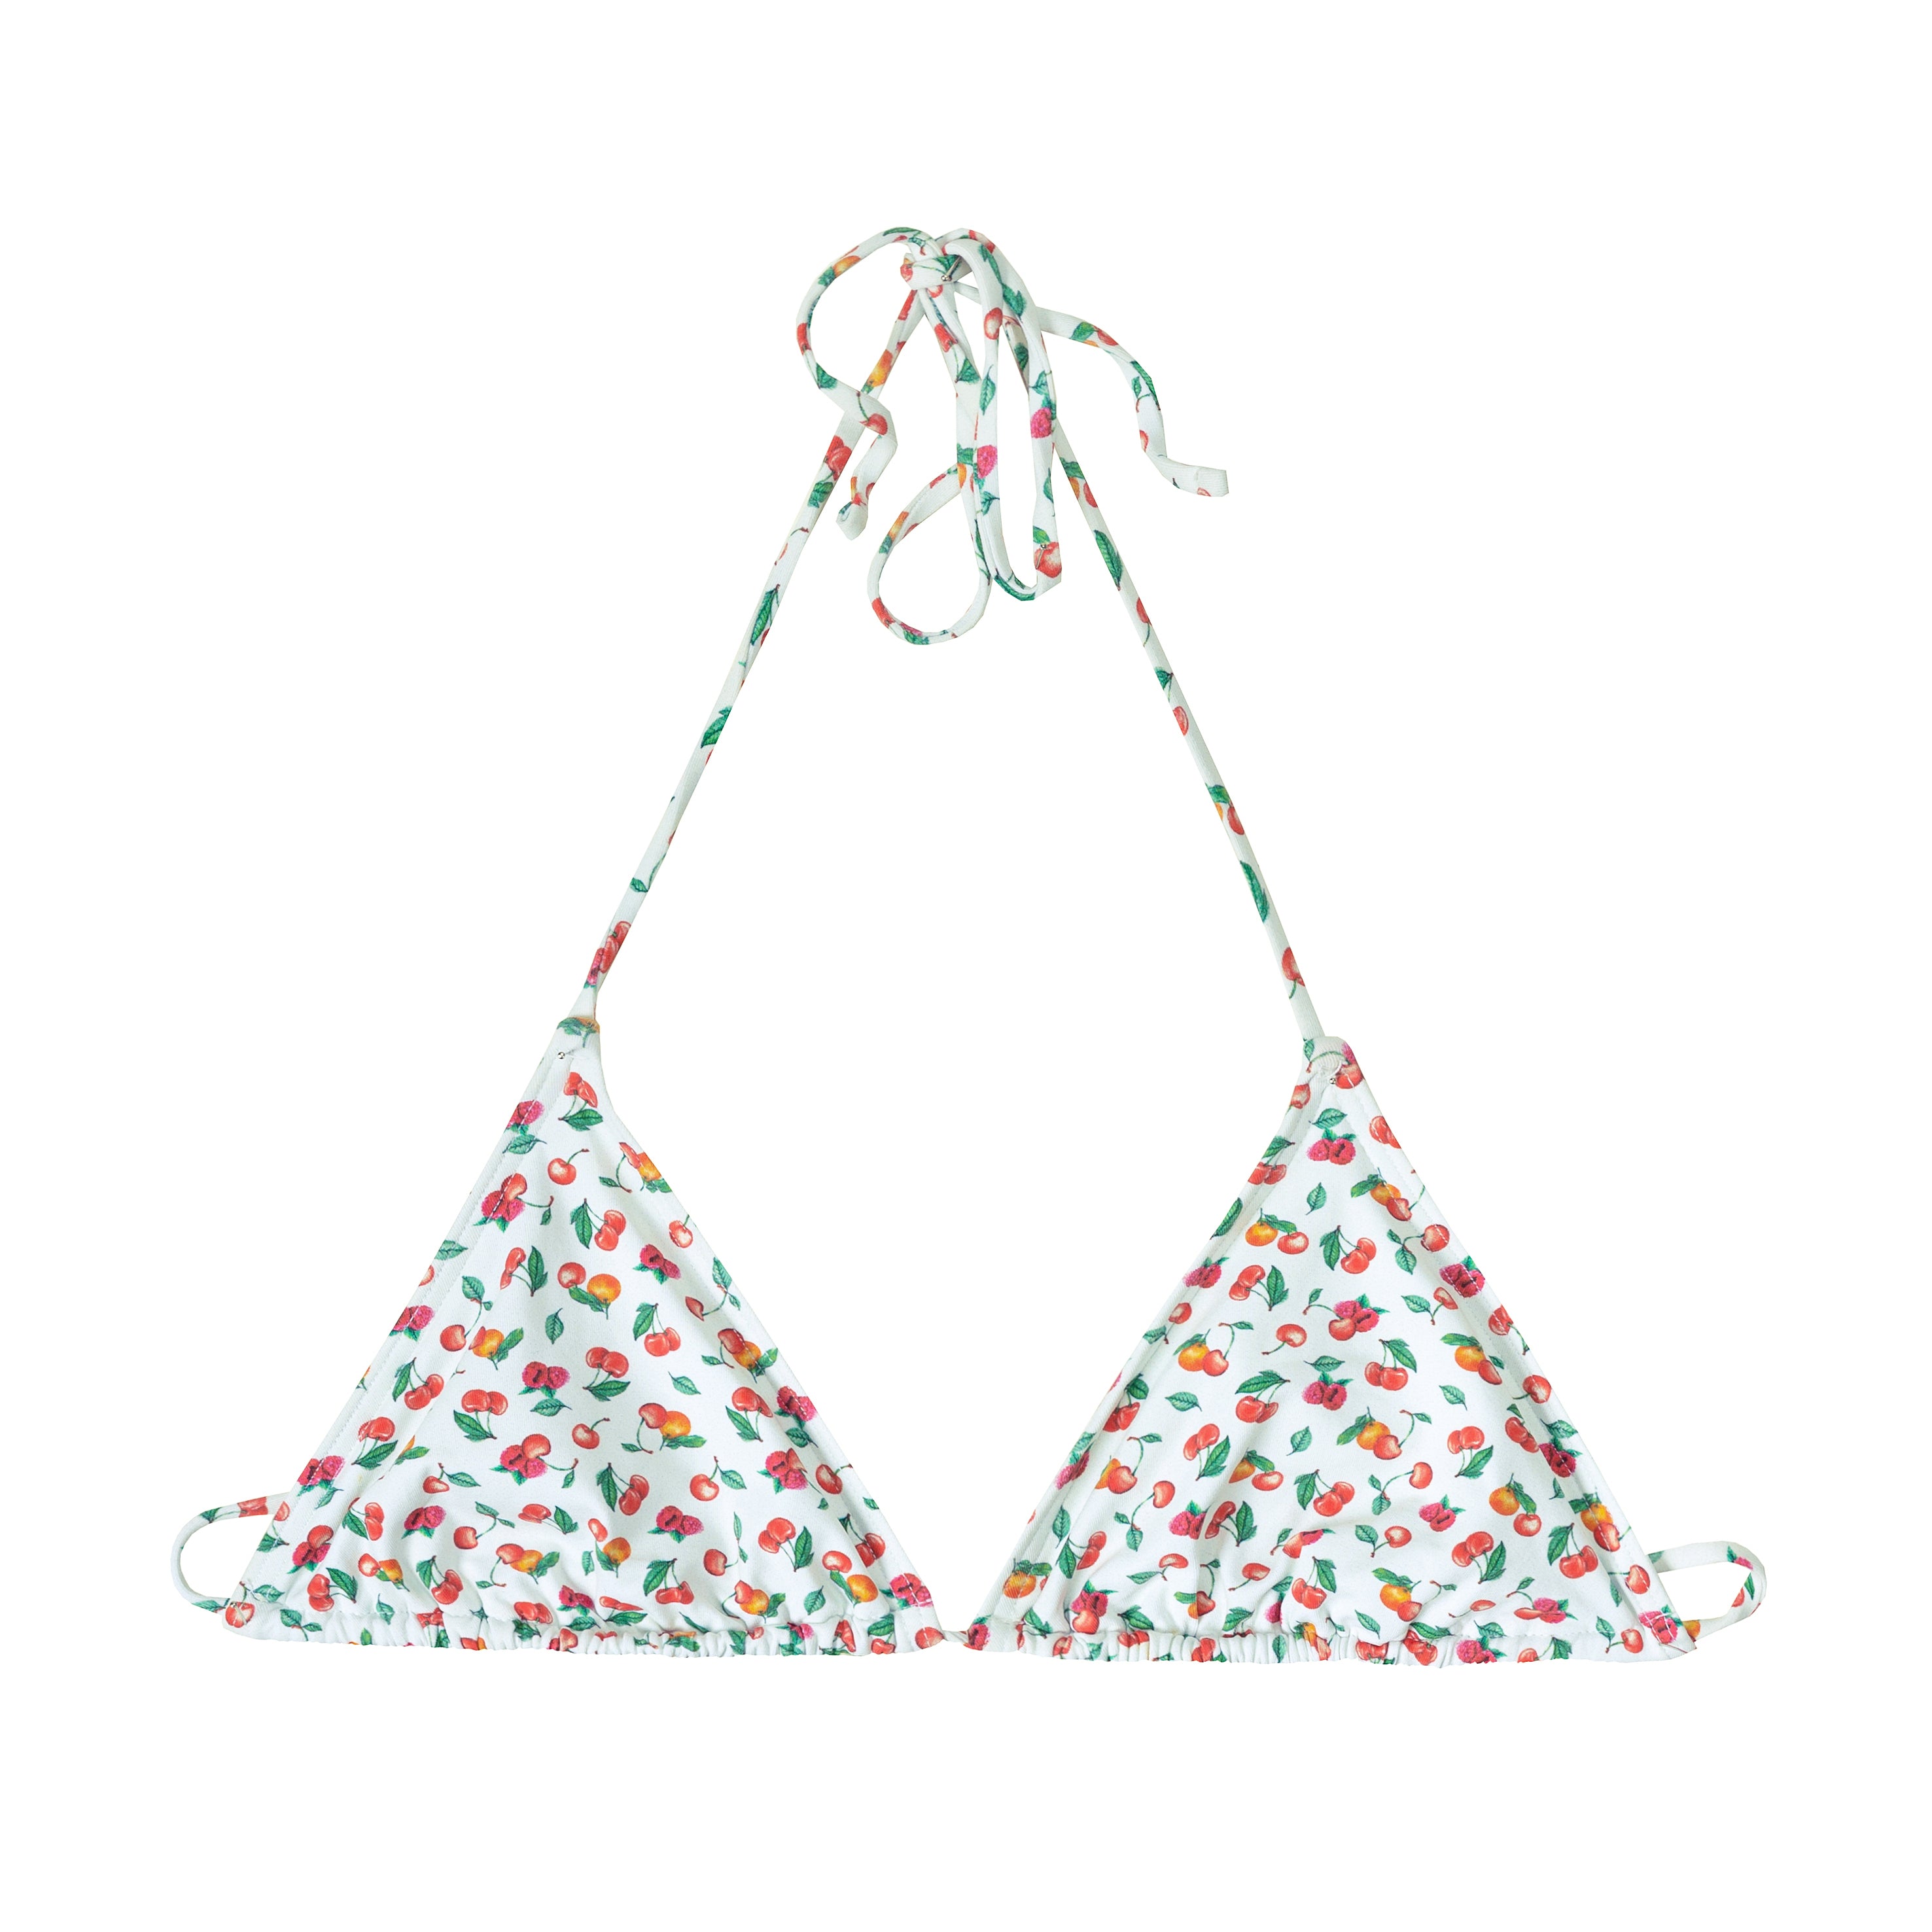 CHERRY COU COU TRIANGLE TOP